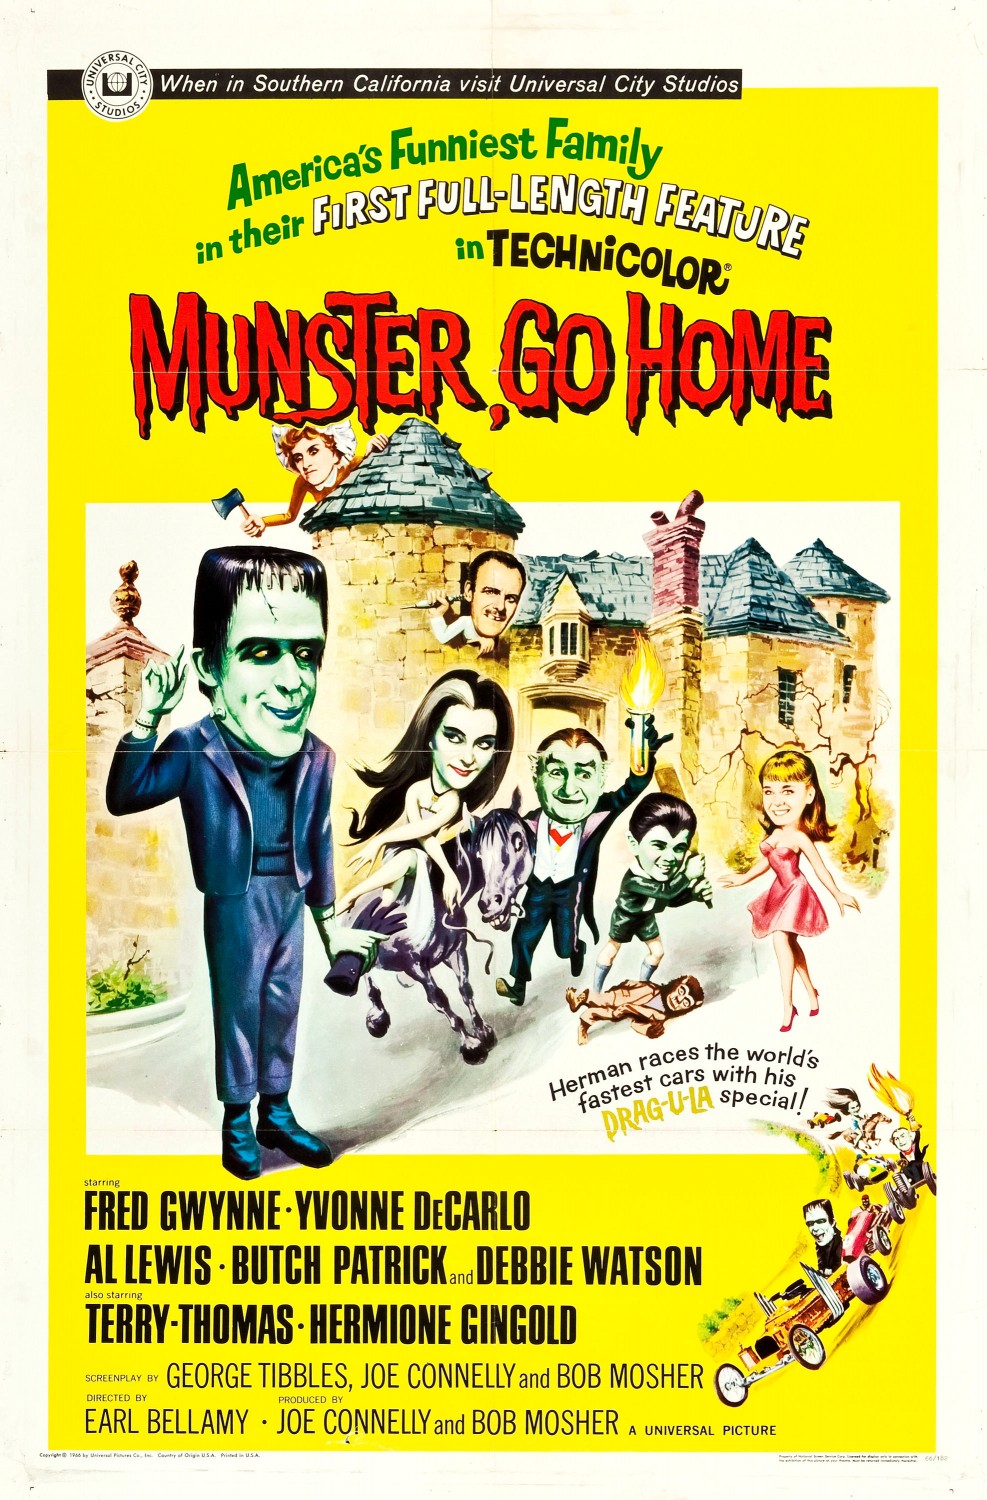 Extra Large Movie Poster Image for Munster, Go Home! 